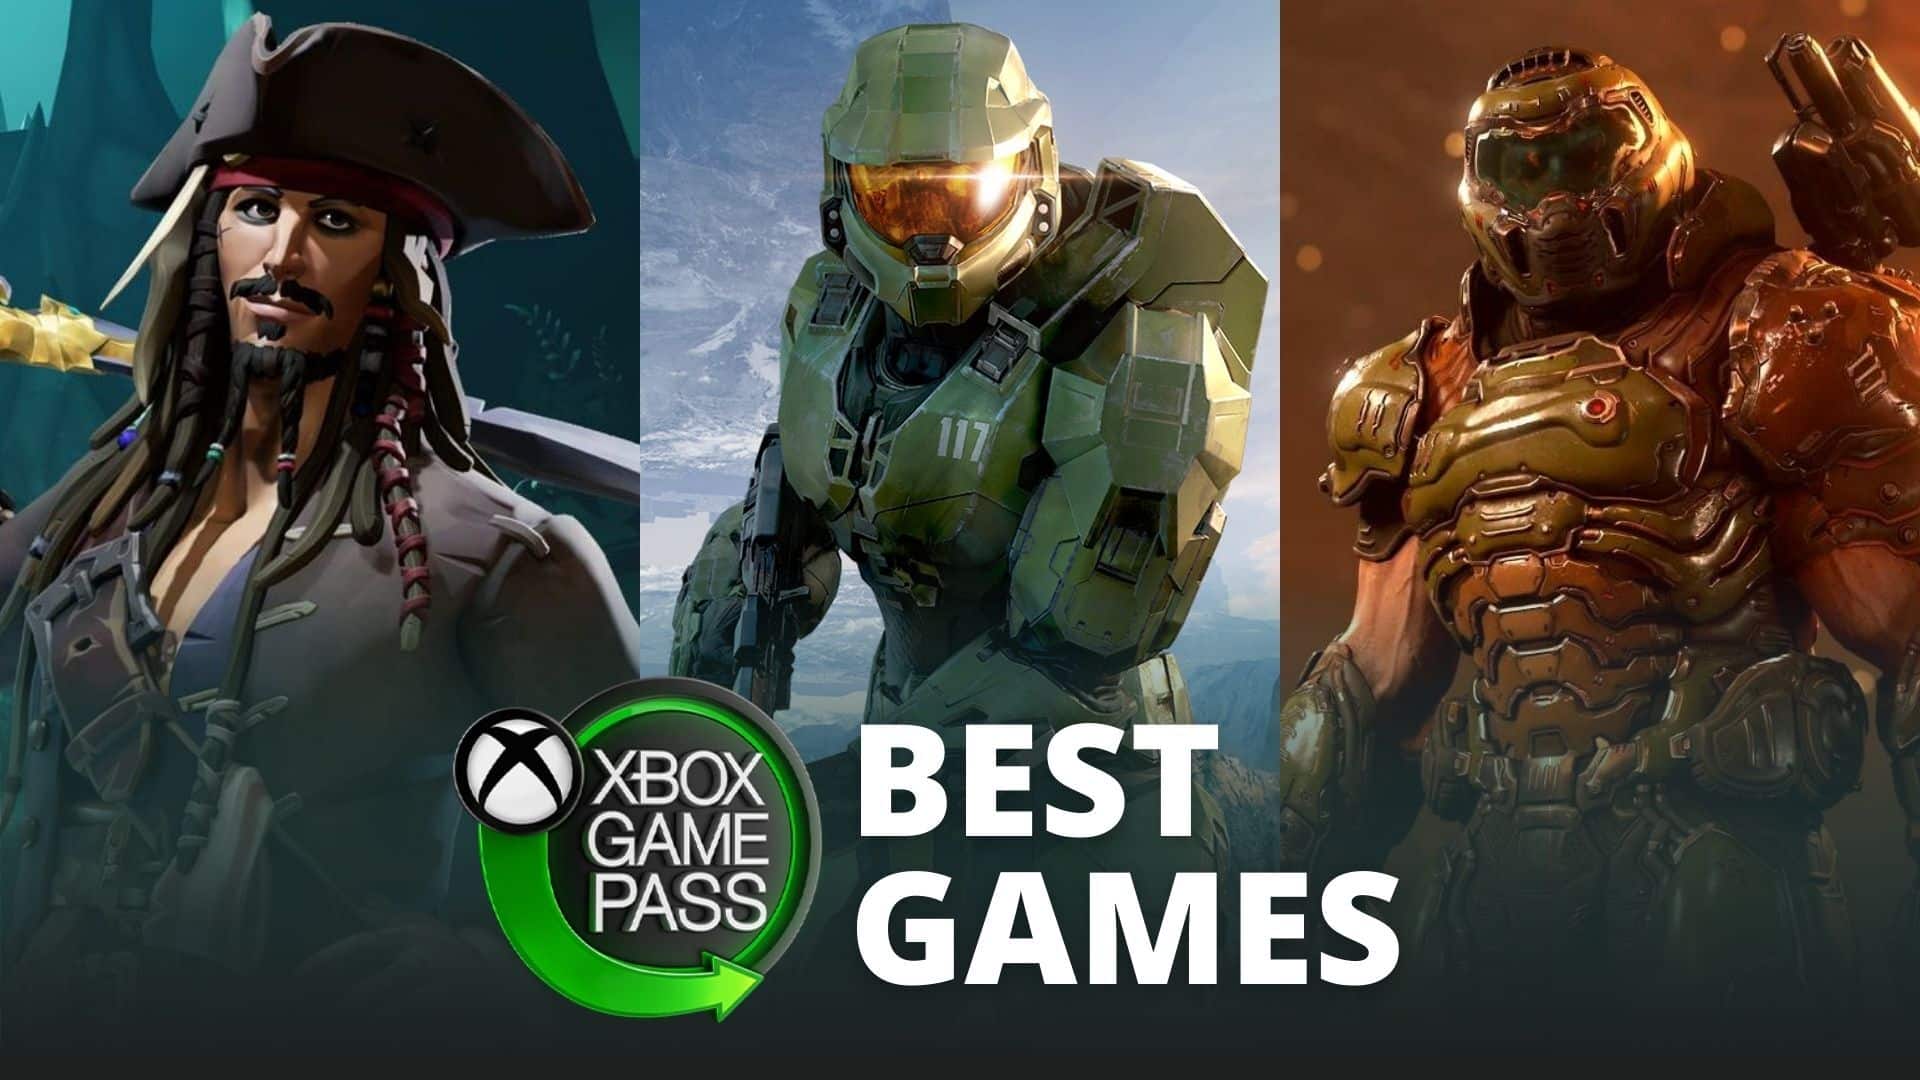 Xbox Game Pass logo with Jack Sparrow, Master Chief and Doomslayer